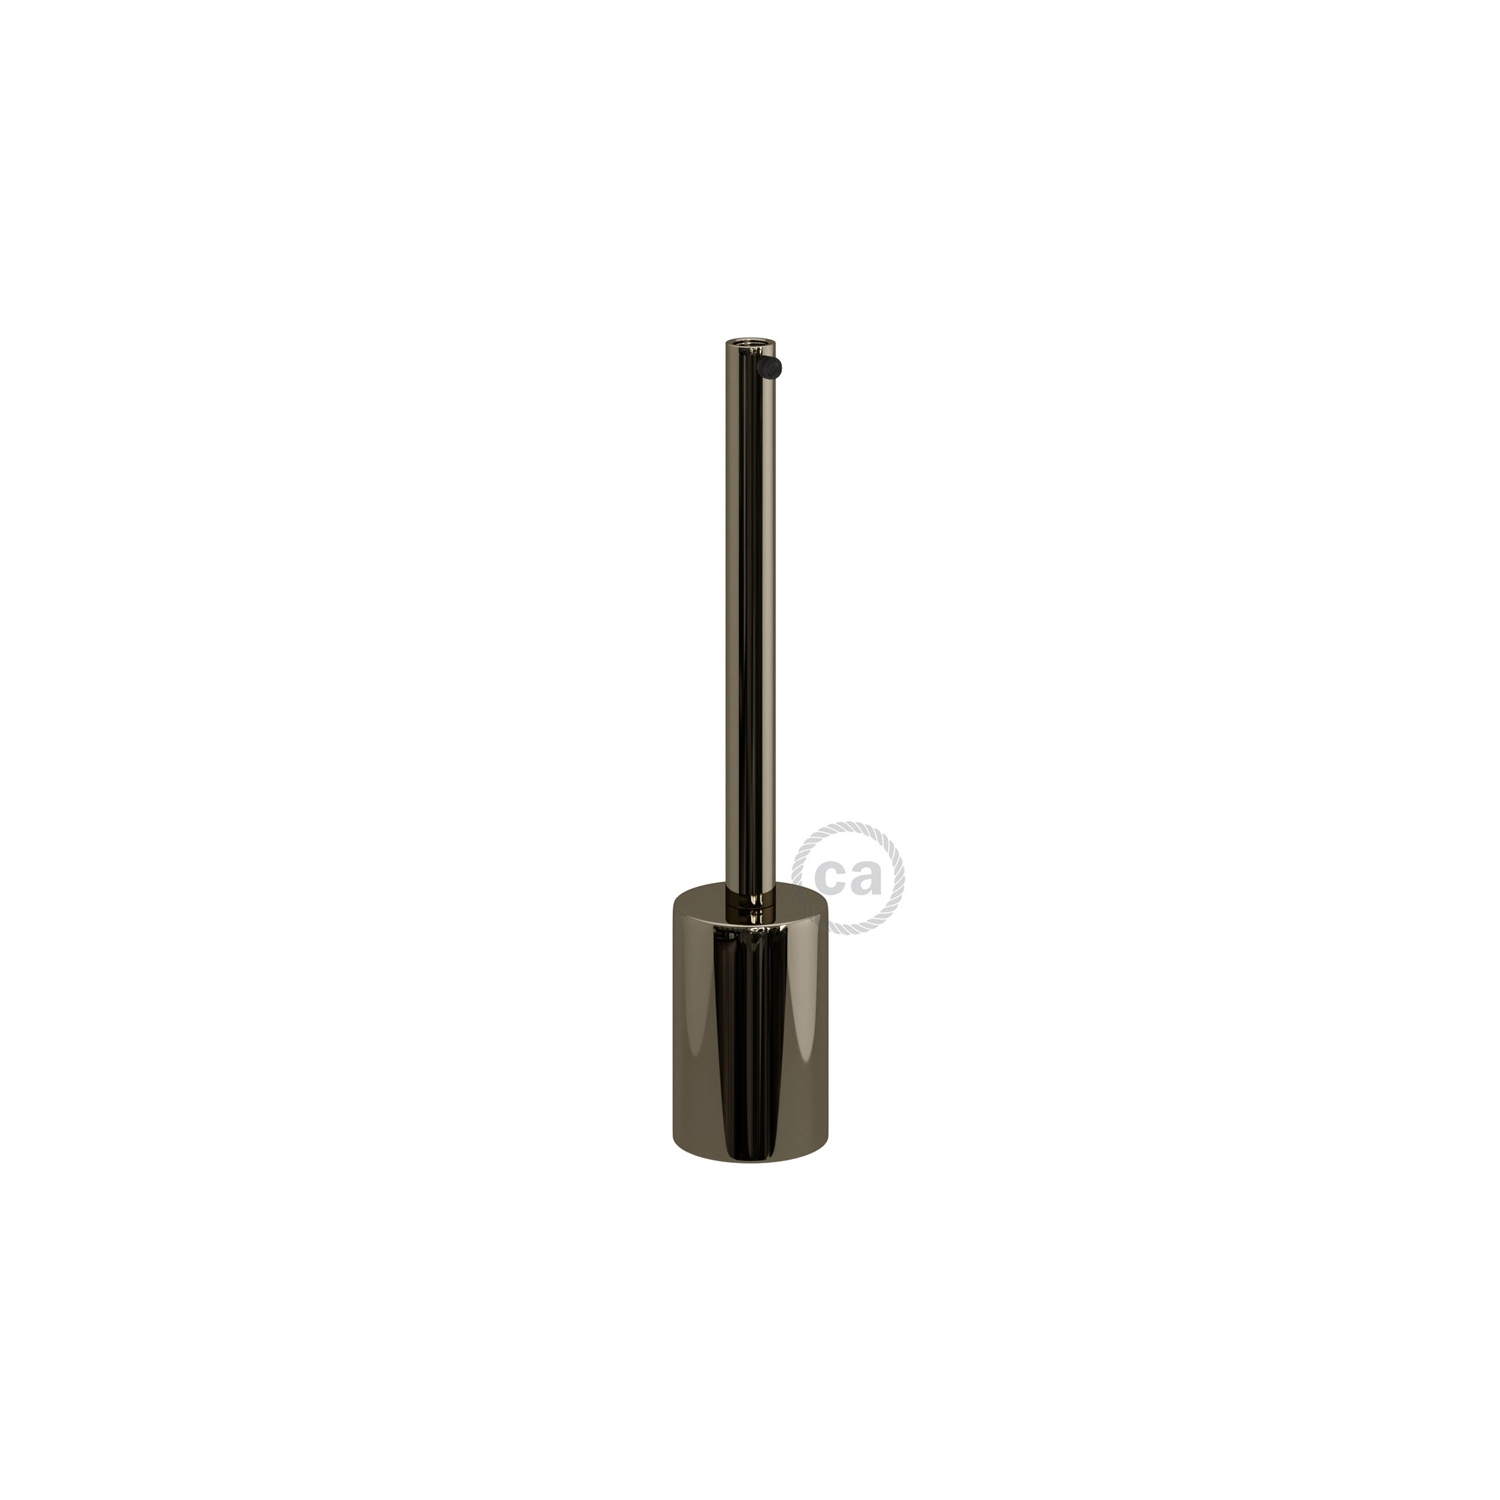 Cylindrical metal UL E26 socket kit with 15 cm cable clamp